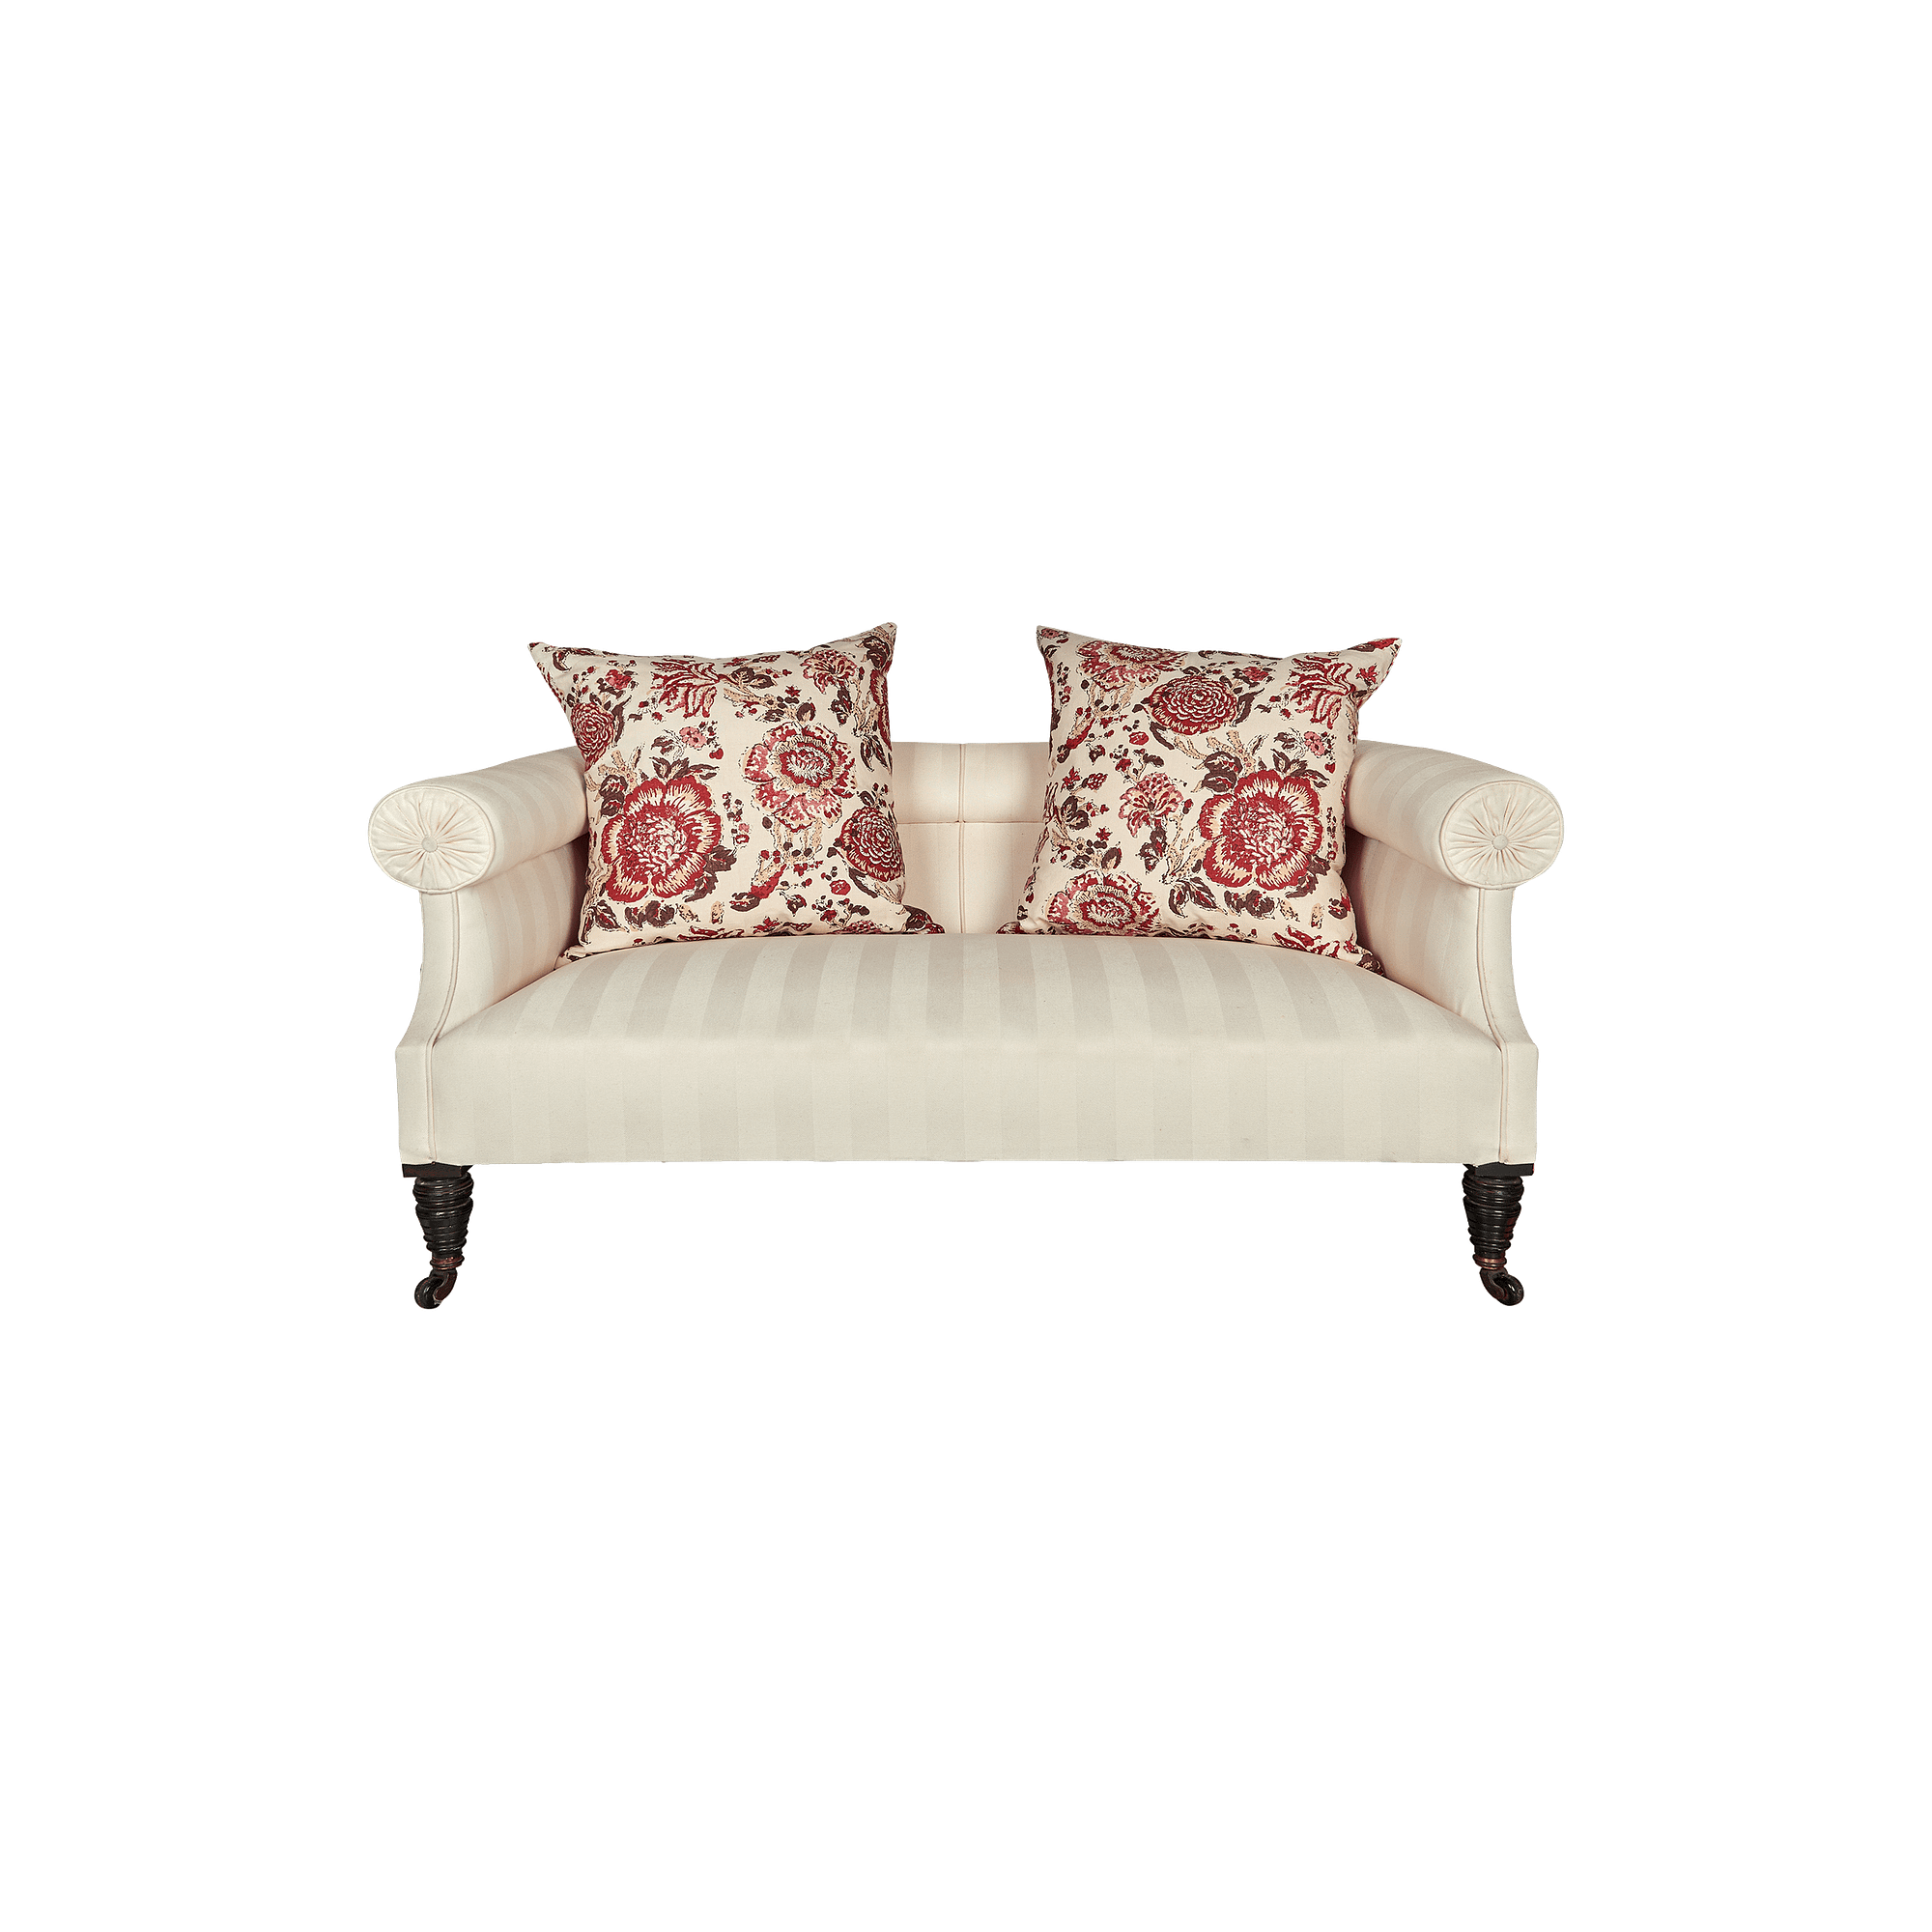 US-001 antique unusual small upholstered sofa in cream linen